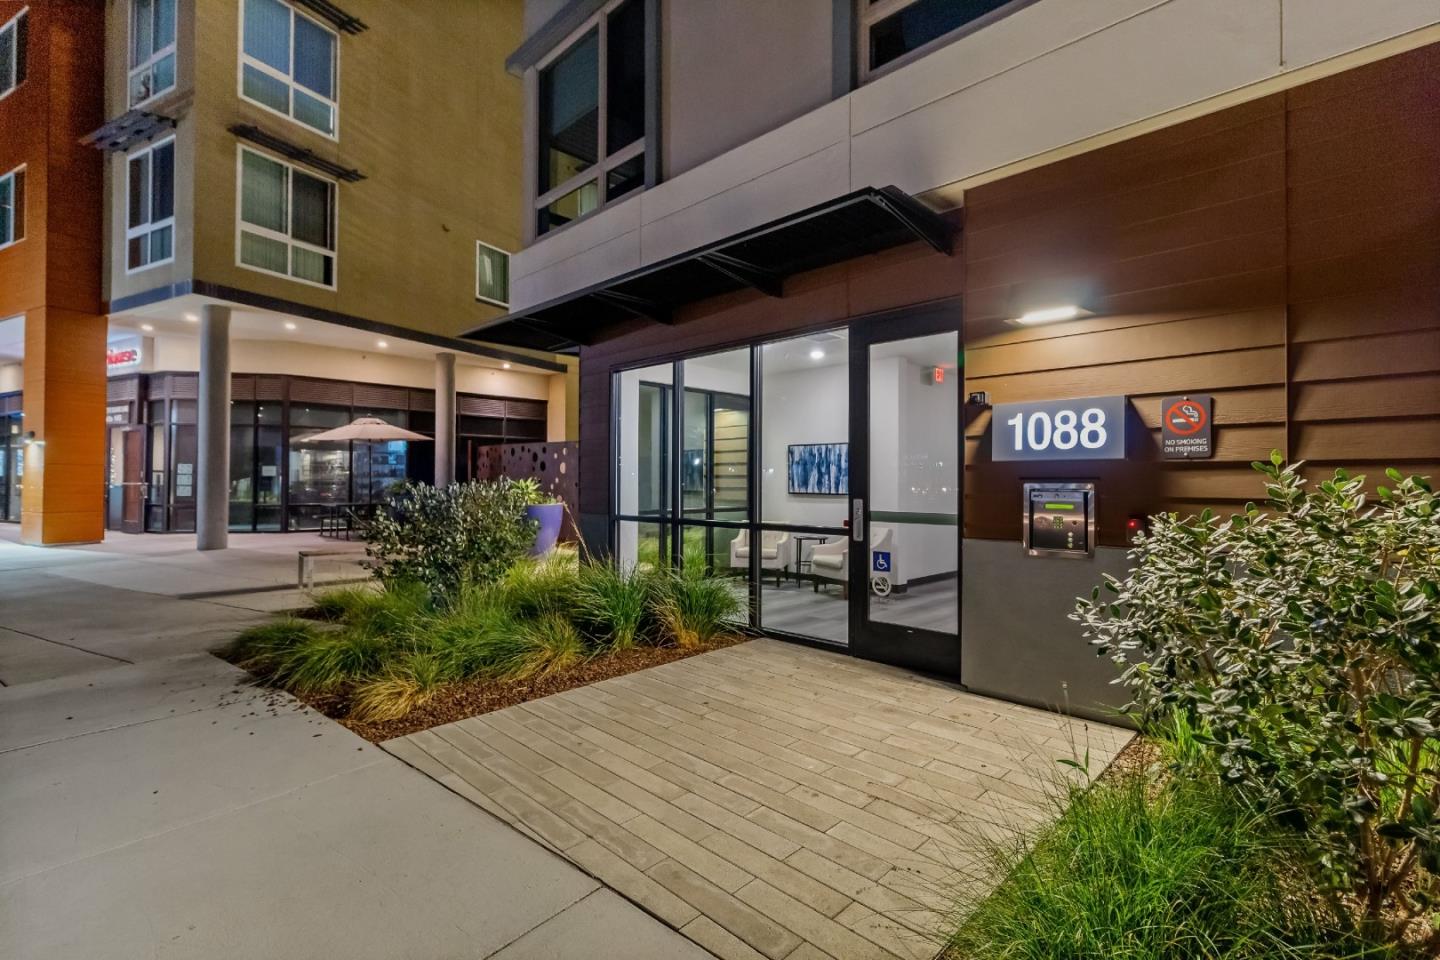 Rare opportunity to own a top floor-corner unit at Foster Square. Built in 2019, this condo has all the modern features for todays busy adult. If you are retired, semi-retired, working from home or just want a low maintenance home this is it!  Steps away from coffee shops, restaurants, and water trails you will enjoy the active lifestyle this location offers.  The Claremont open floor plan has large windows with partial views, kitchen island with stainless steel appliance's and high ceilings.  3 spacious bedrooms, 2 full baths, generous primary bedroom with walk-in closet, keyless entry, ring doorbell, secured lobby, elevator, 2 car detached garaged located inside secured parking area.   This is surely the best value in town.  Come and see how this home can improve your lifestyle.